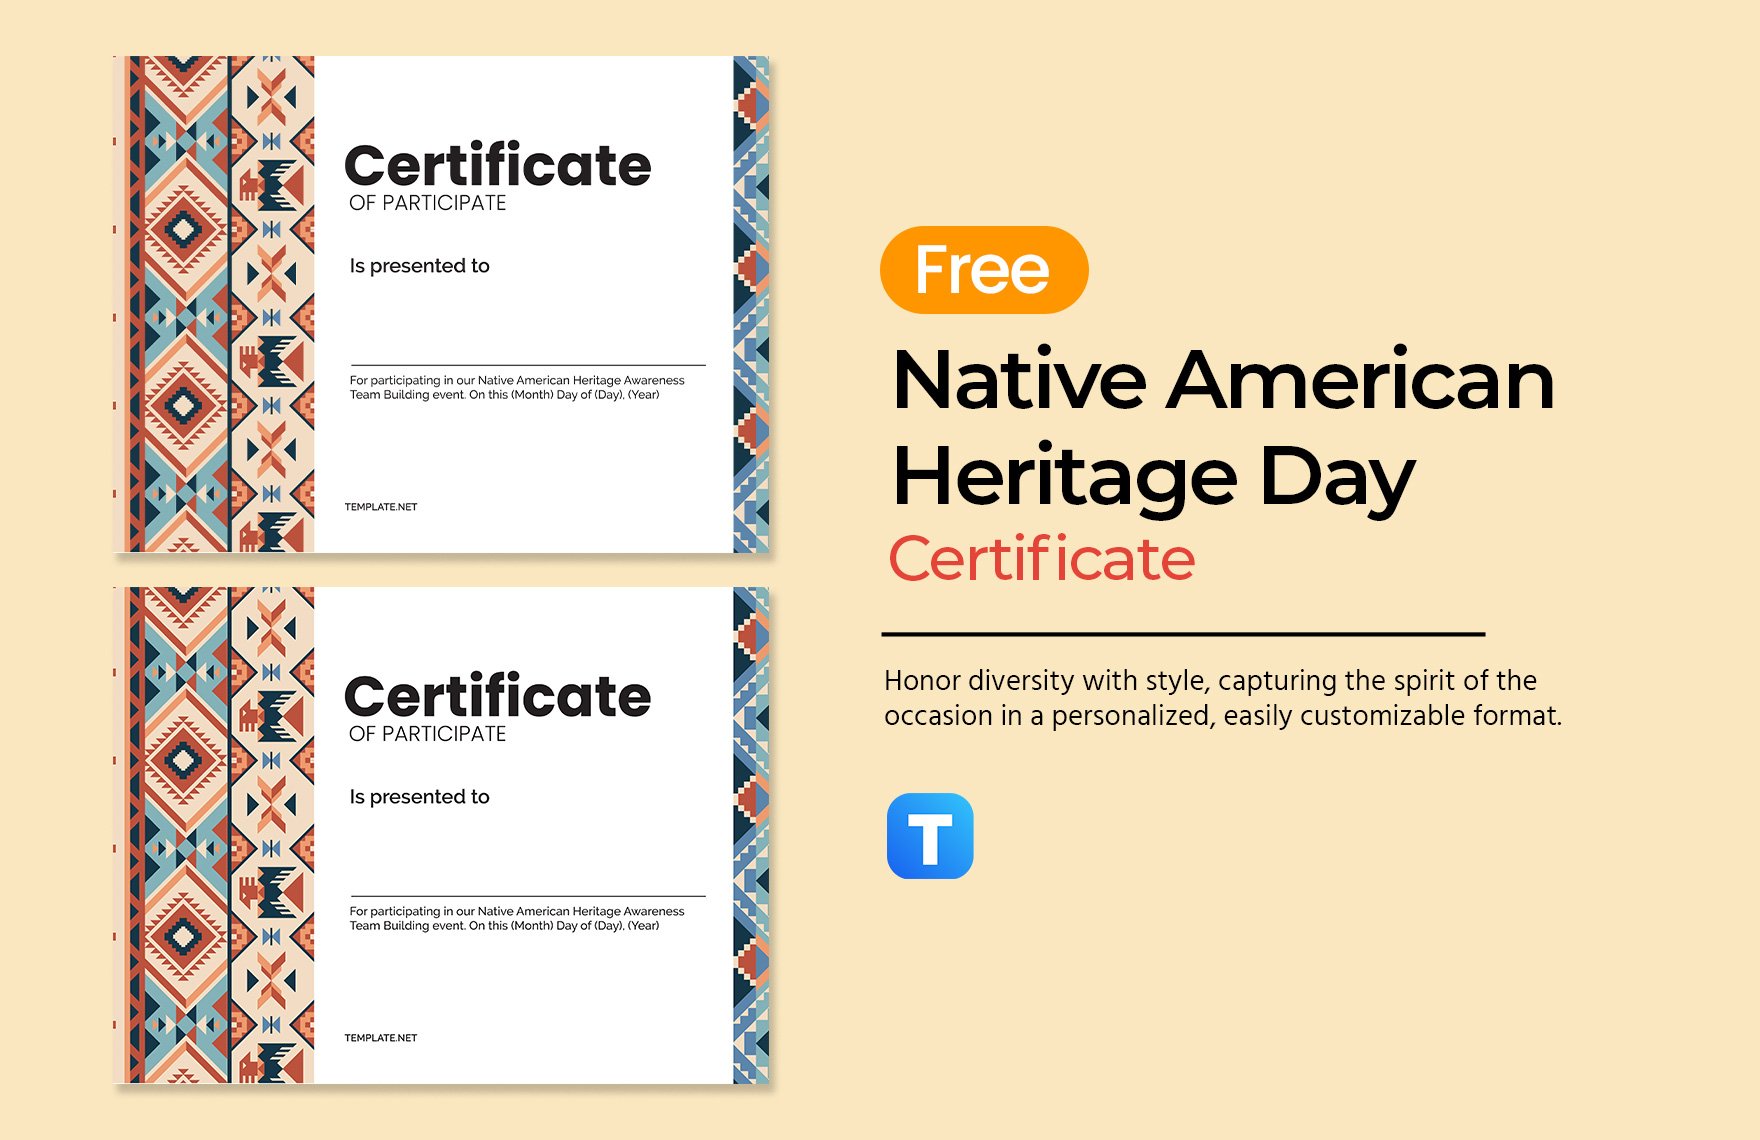 Native American Heritage Day Certificate